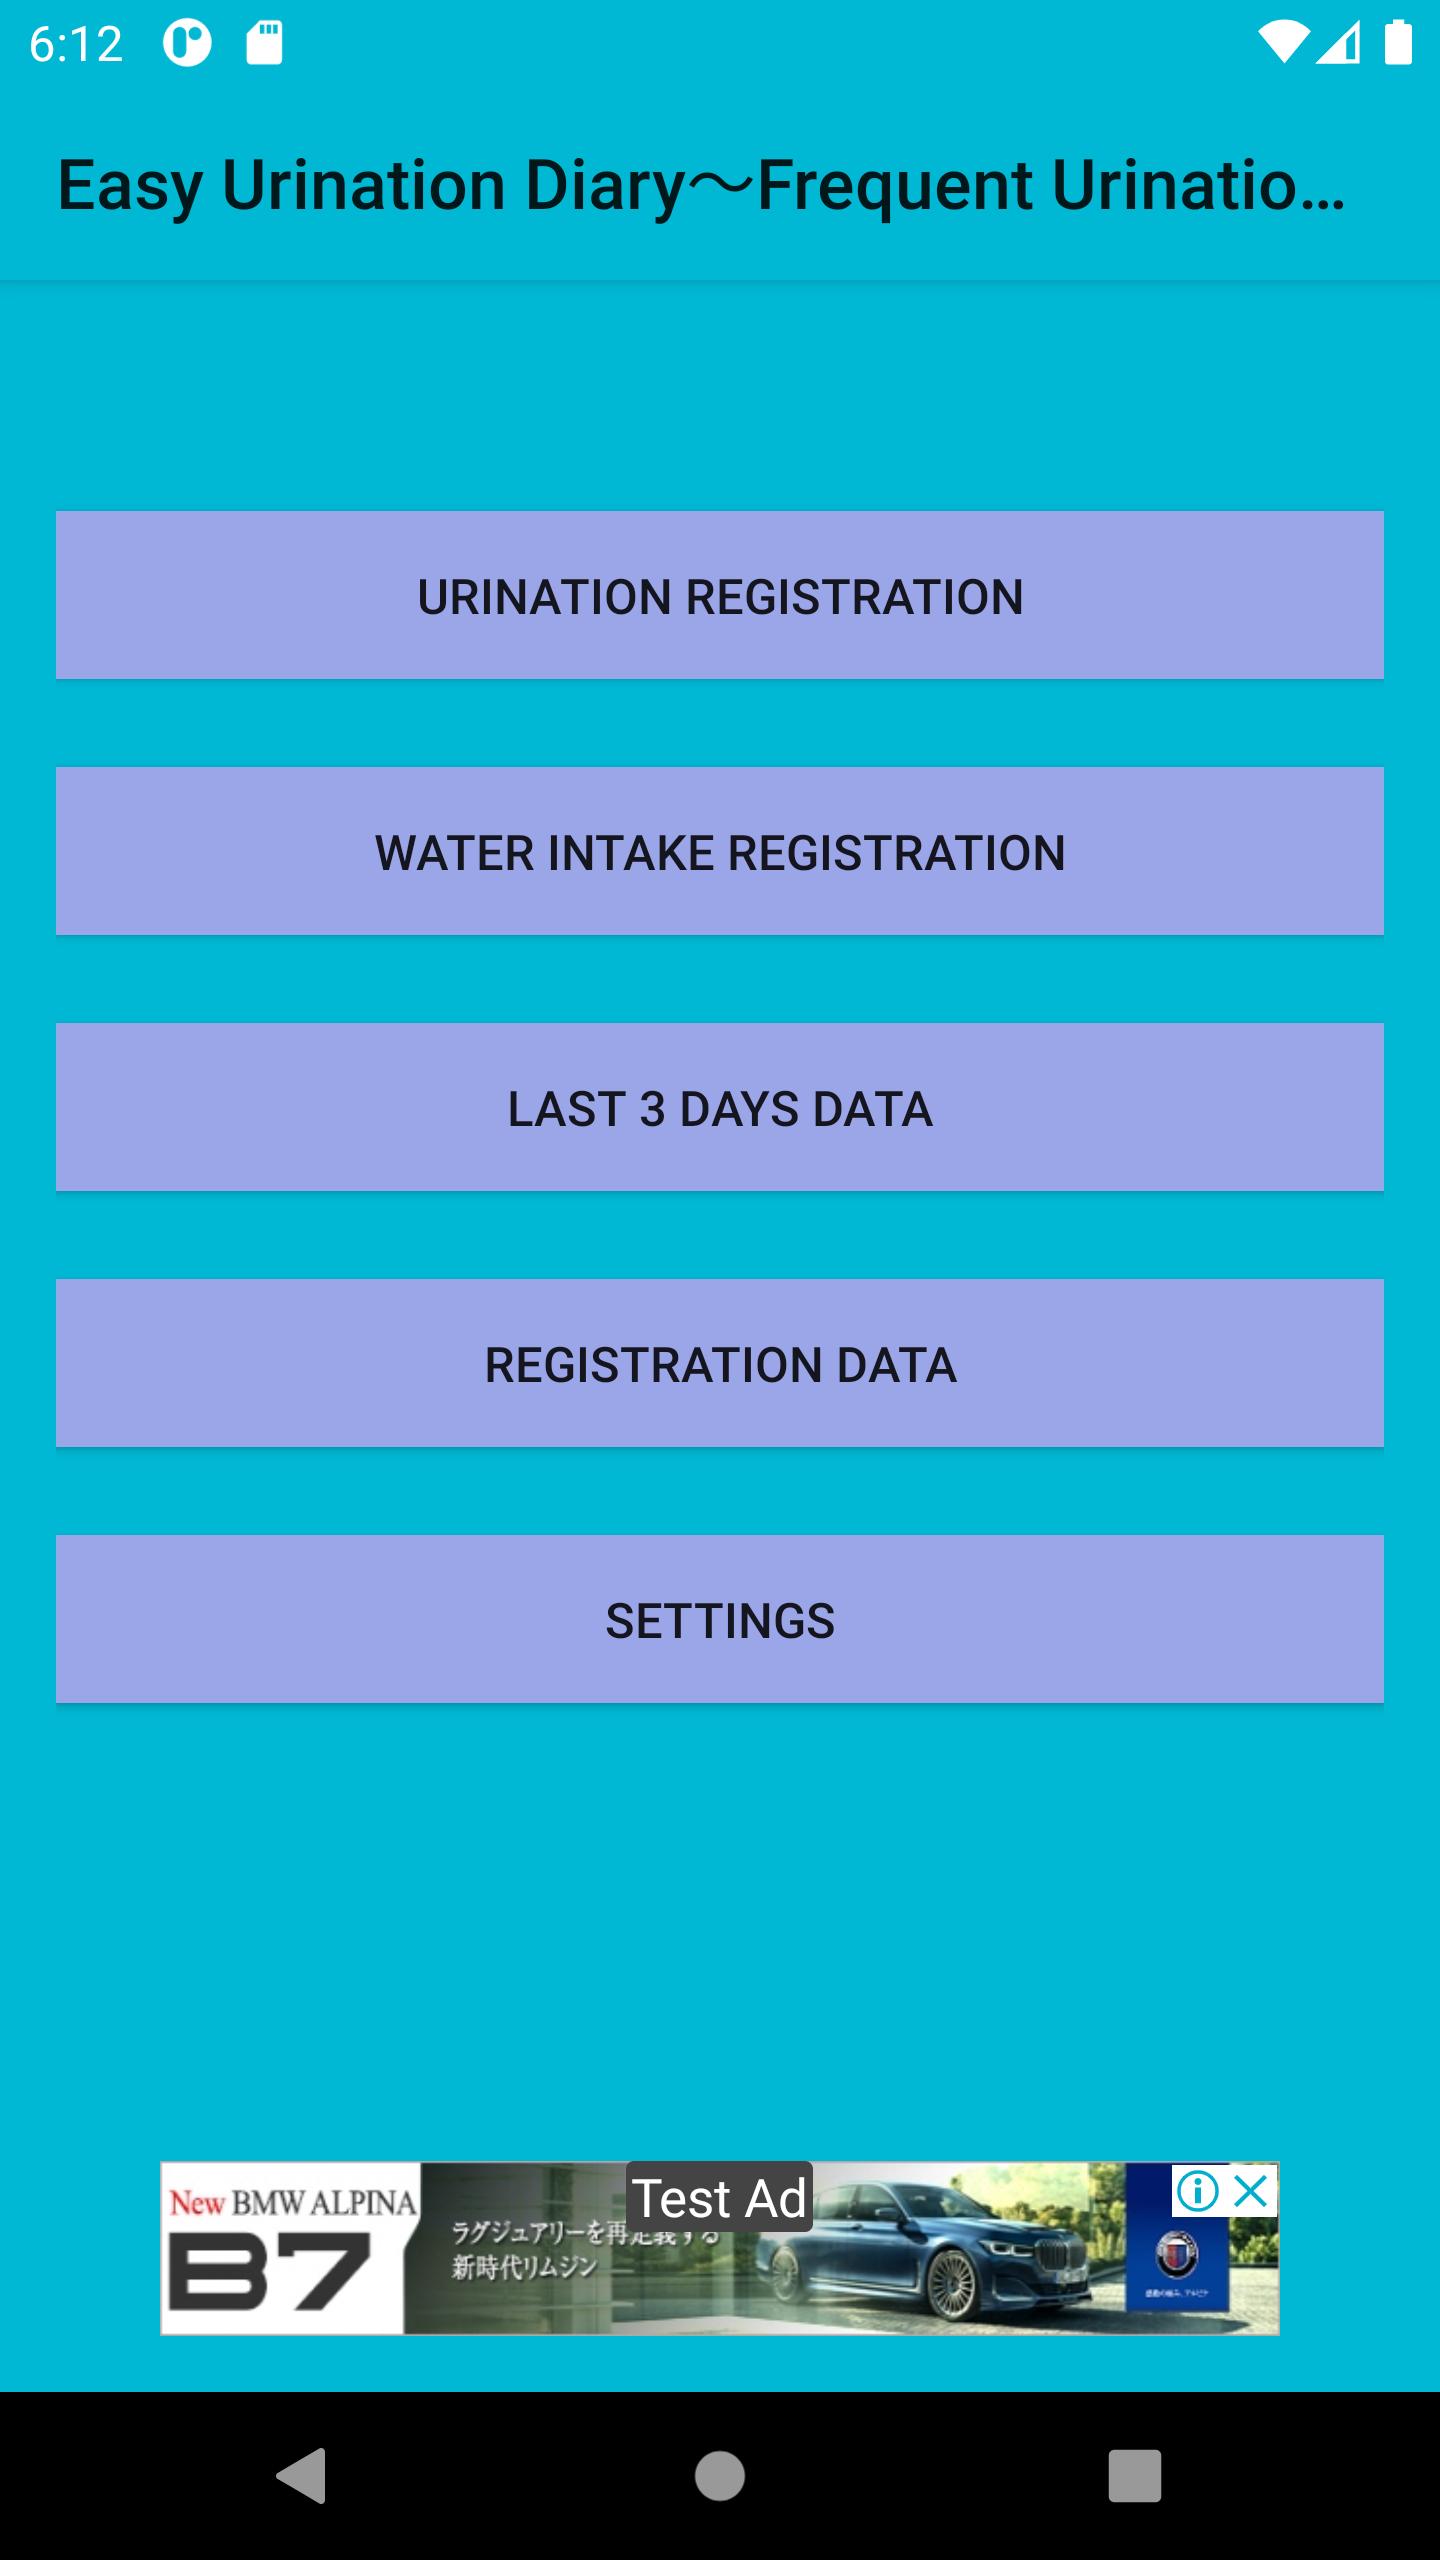 Easy Urination Diary～Frequent Urination～ 7.0 Screenshot 2